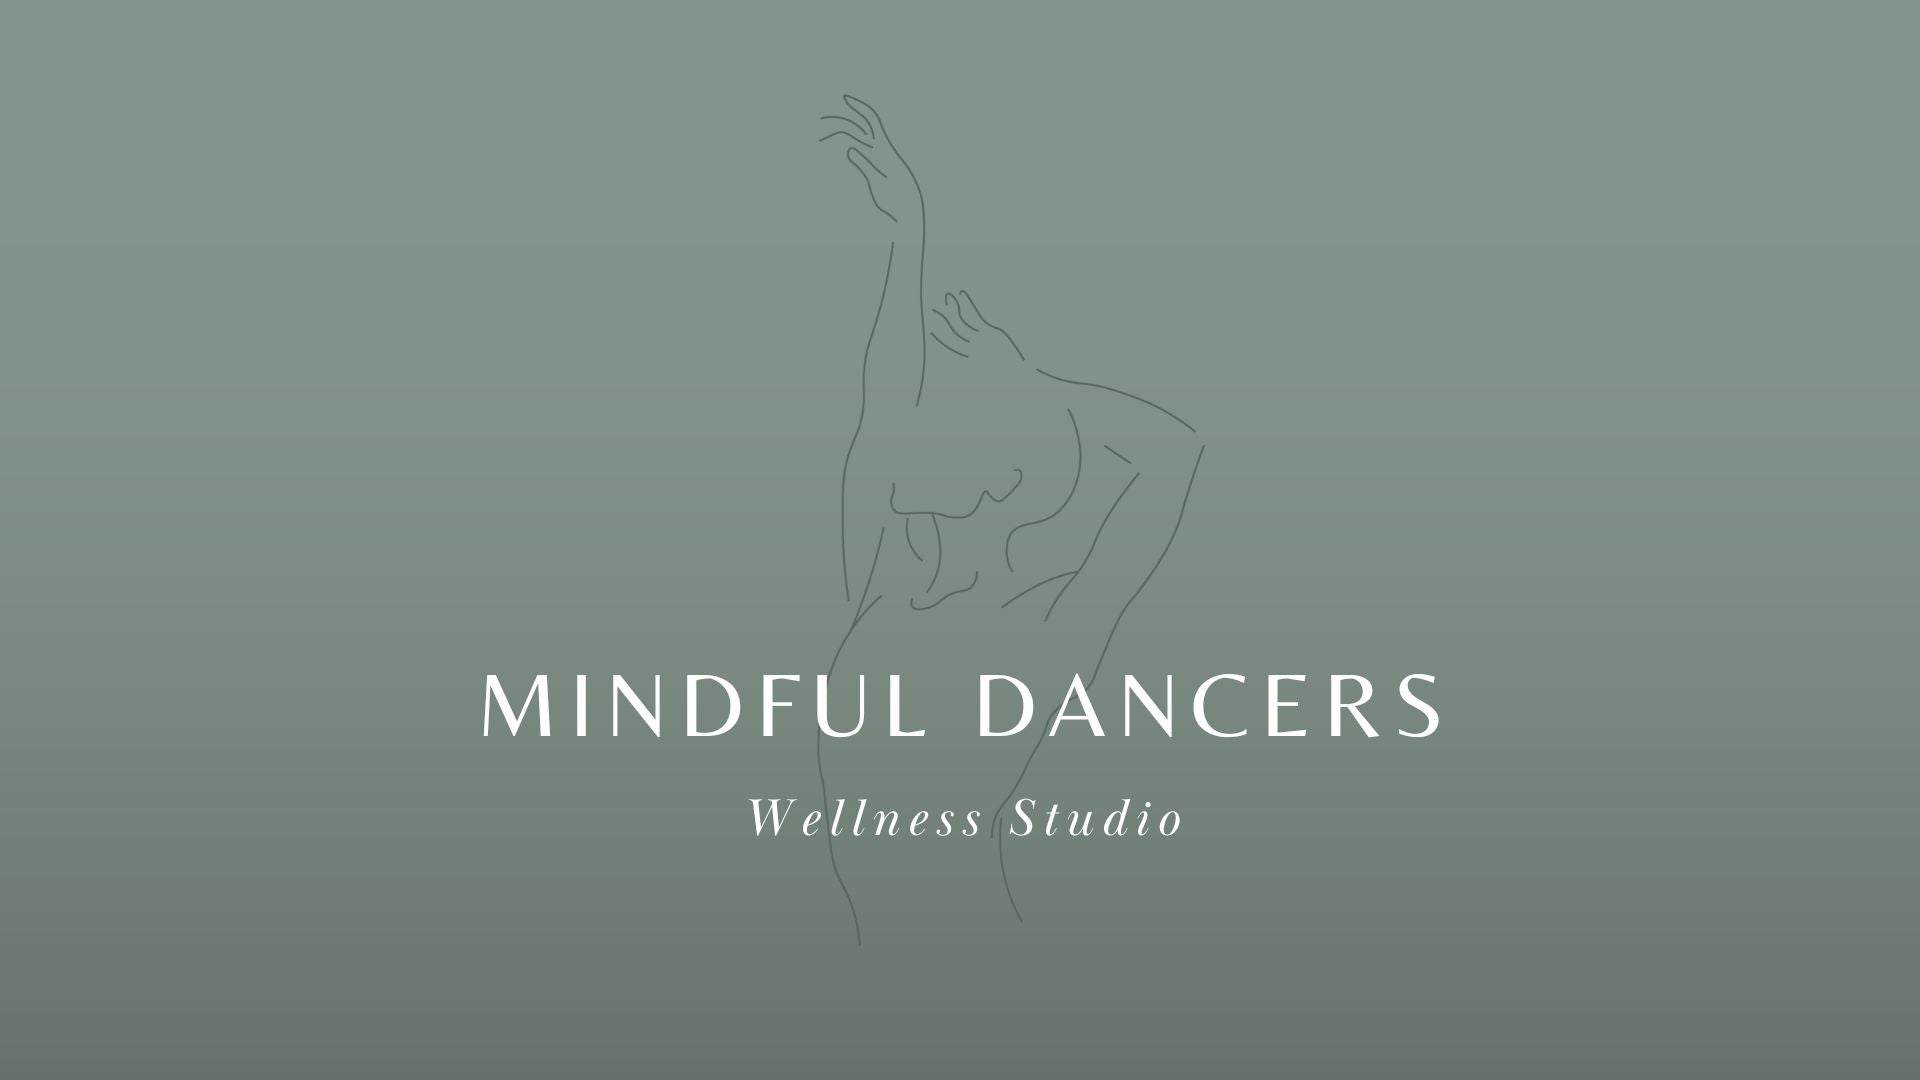 Load video: Introductory video to Mindful Dancers Wellness Studio.